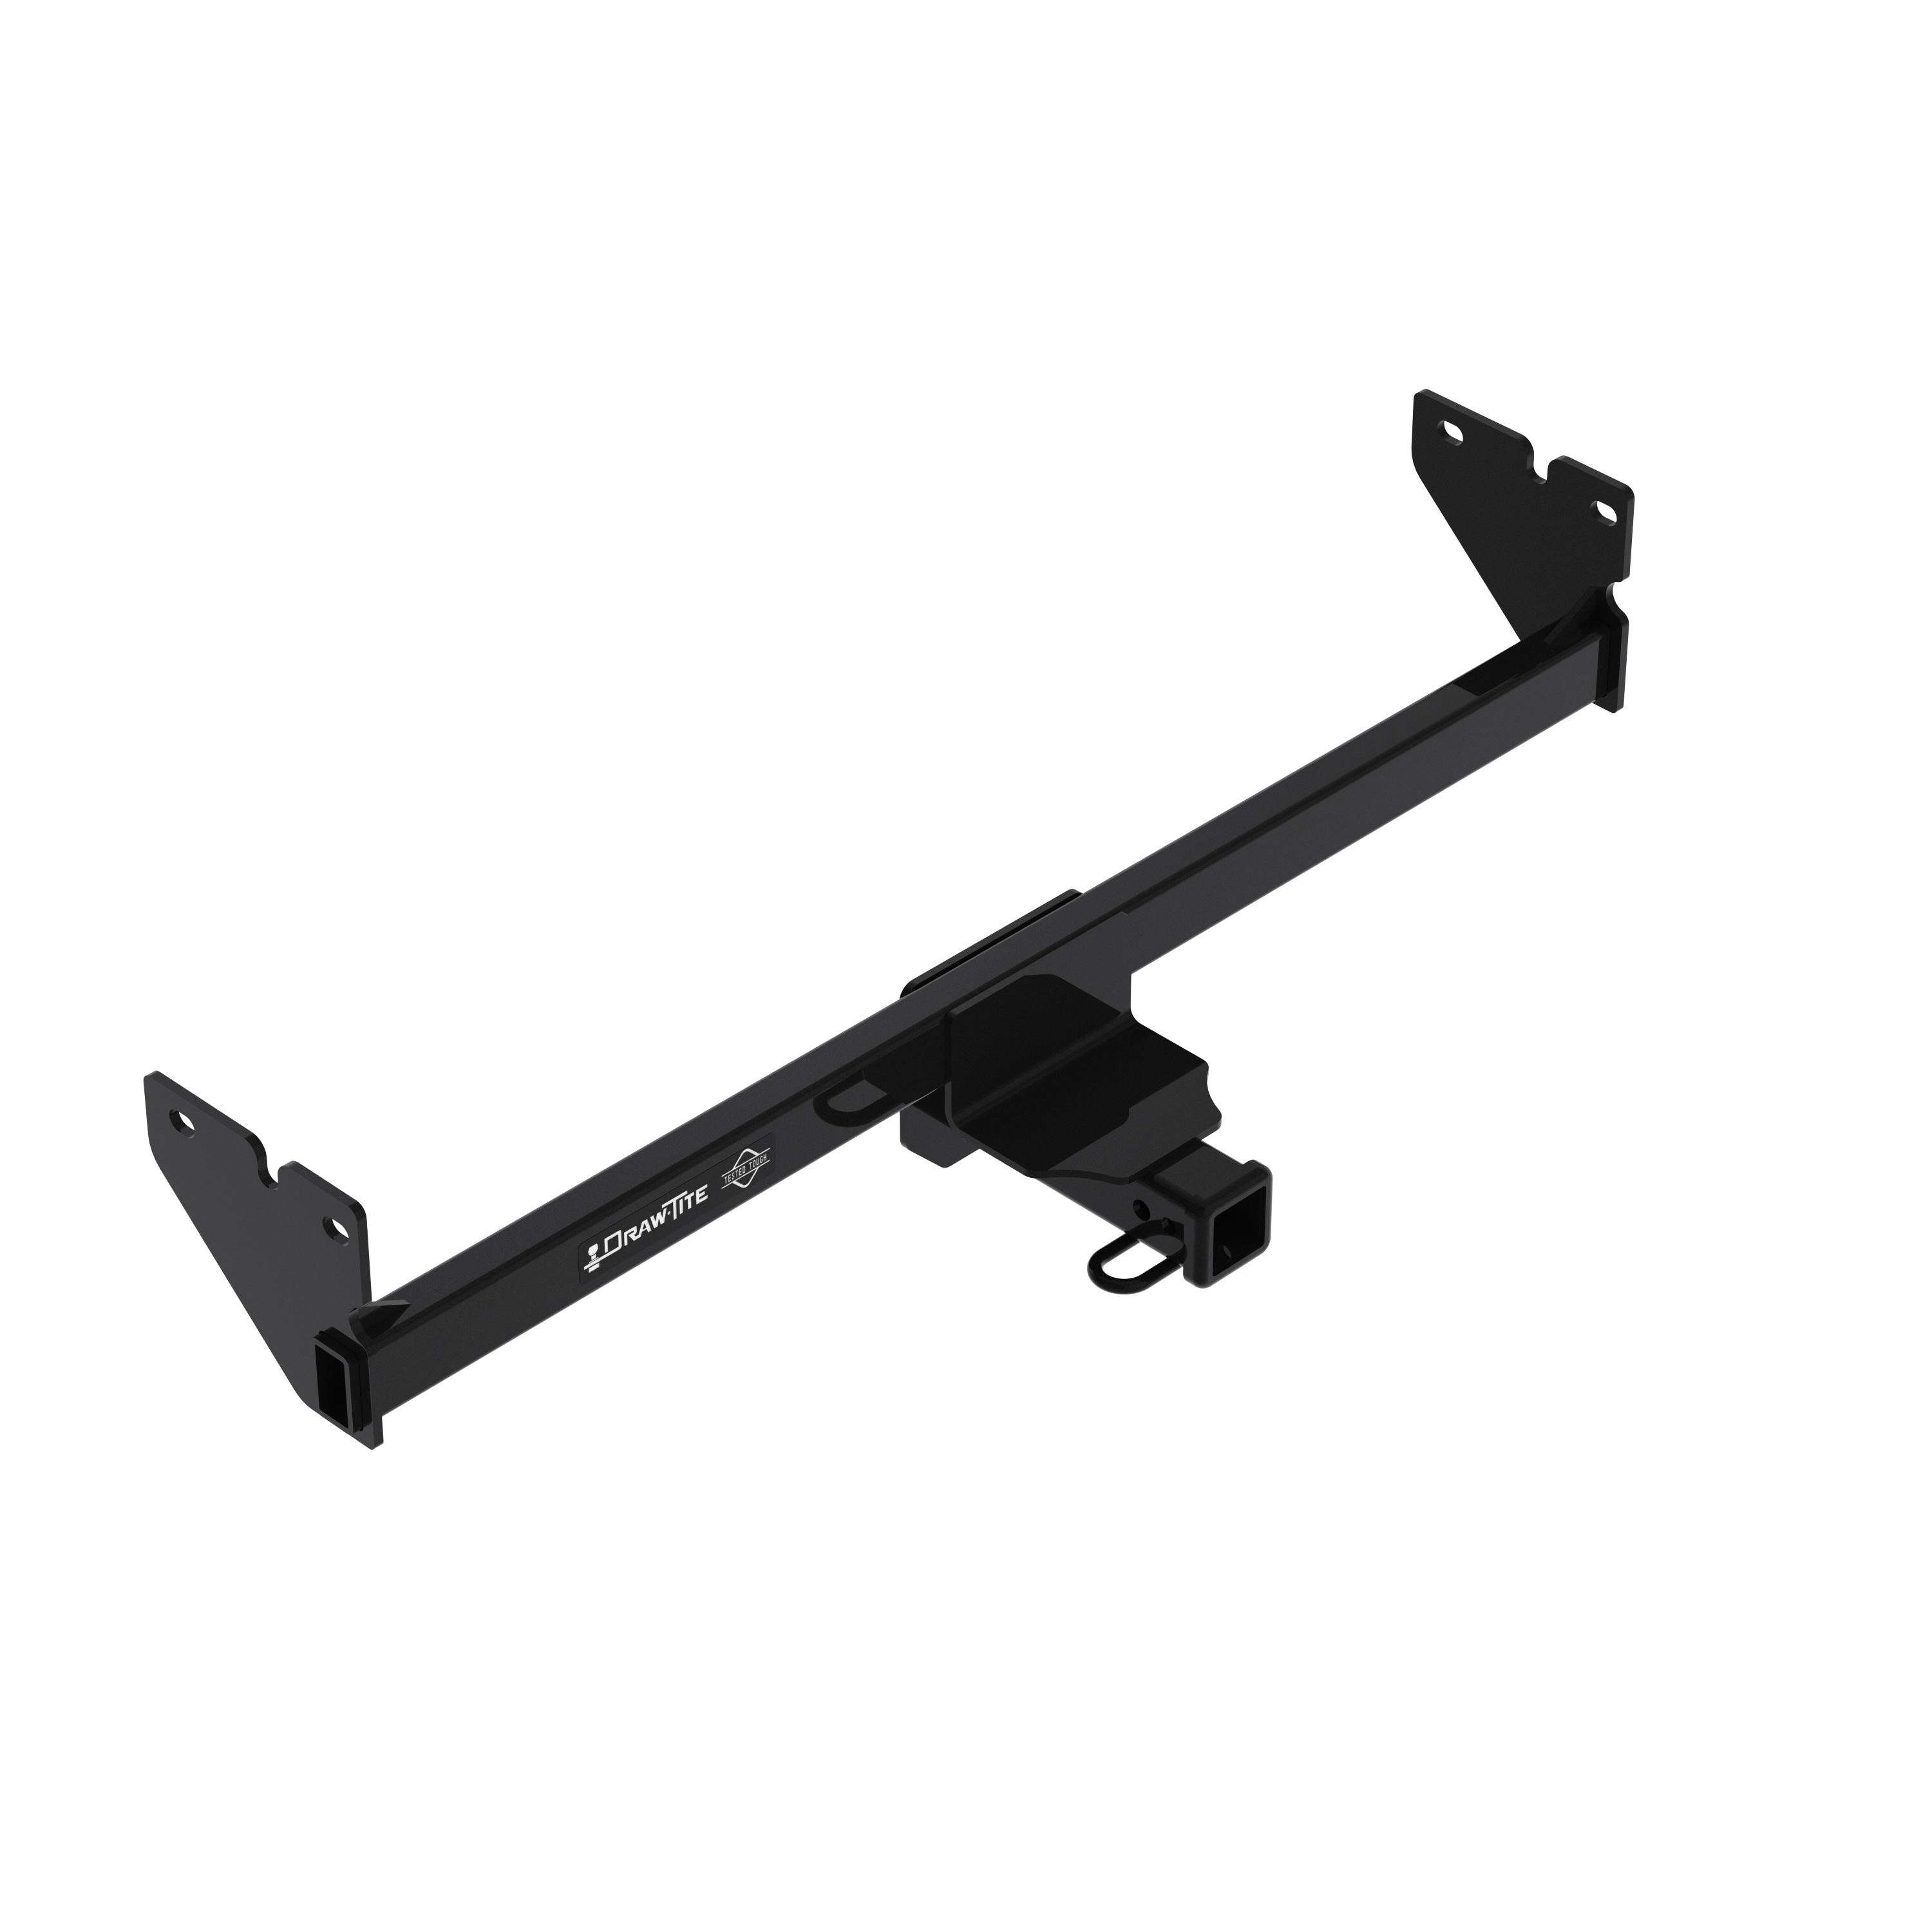 Draw Tite 76386 Max-Frame Trailer Hitches Class III 2" (5000 lbs GTW/750 lbs TW) Volkswagen Atlas 2020-2021